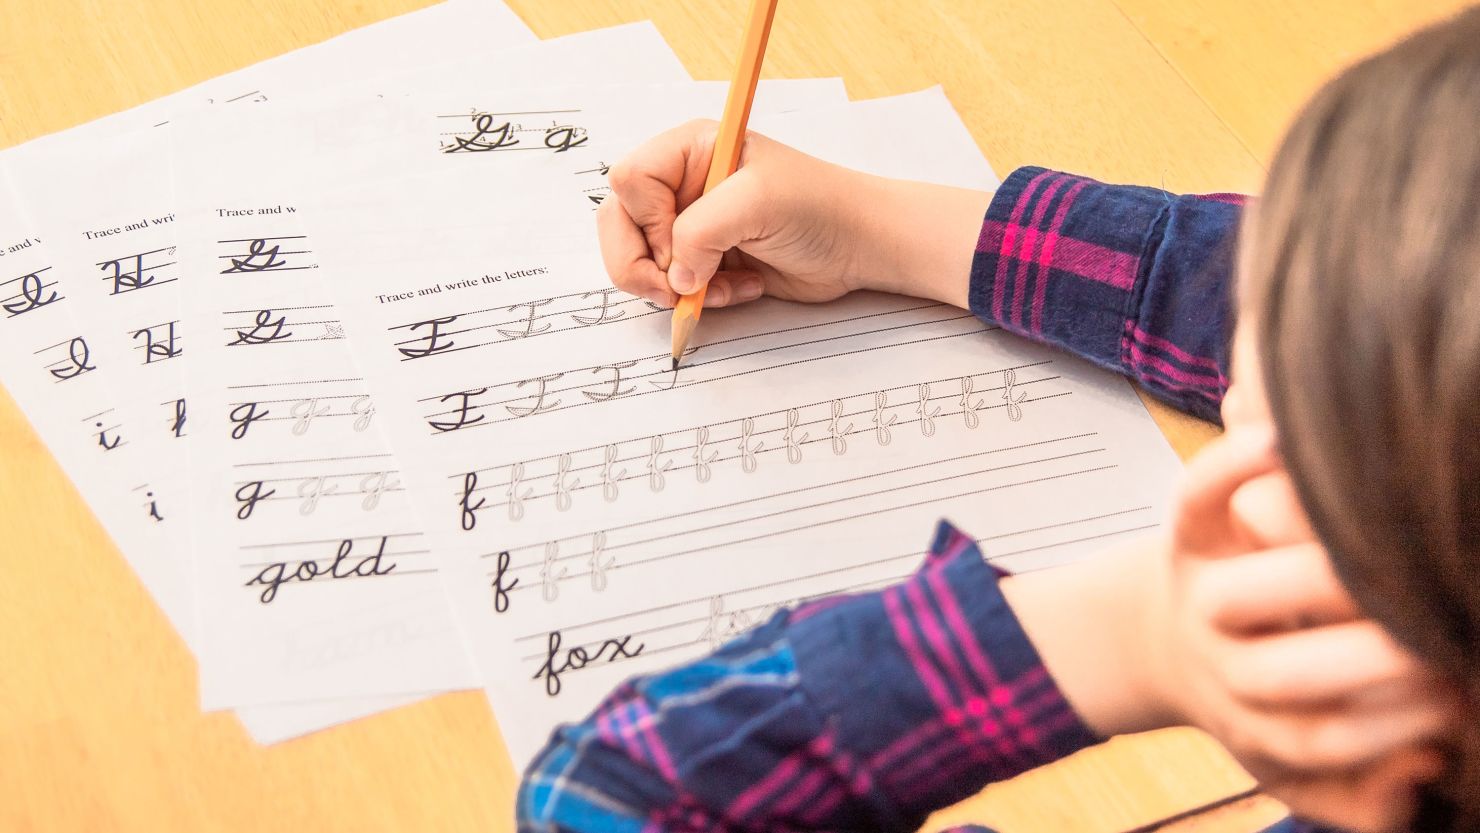 Some research shows that learning cursive benefits a child's development.